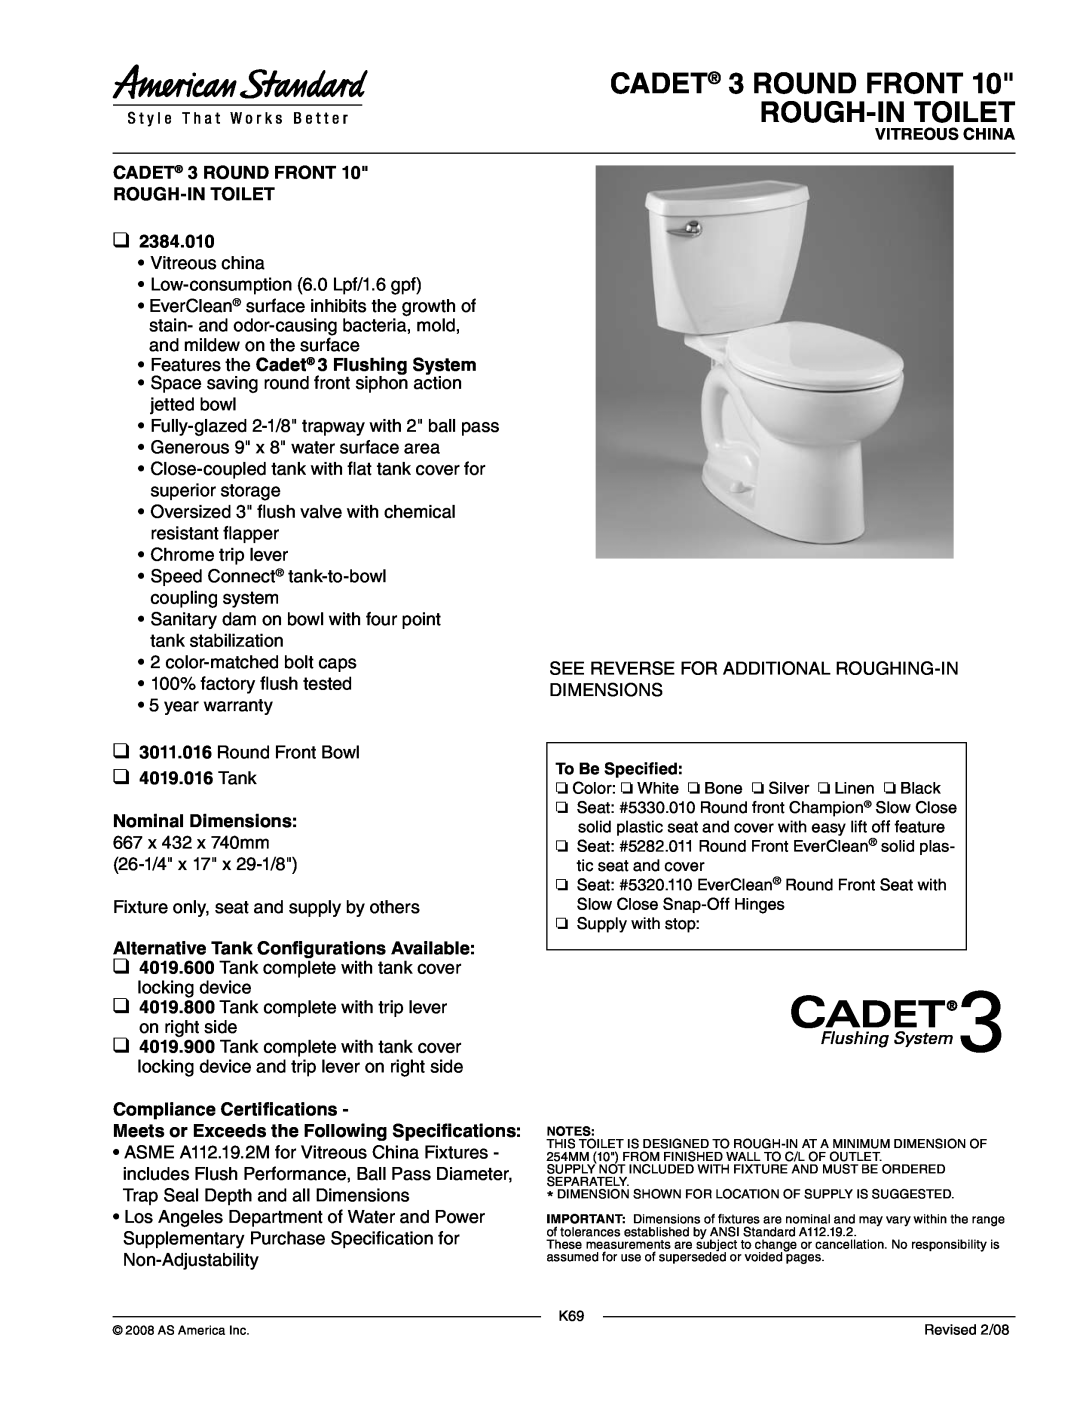 American Standard 4019.800 dimensions CADET 3 ROUND FRONT ROUGH-INTOILET, Features the Cadet 3 Flushing System, Tank 